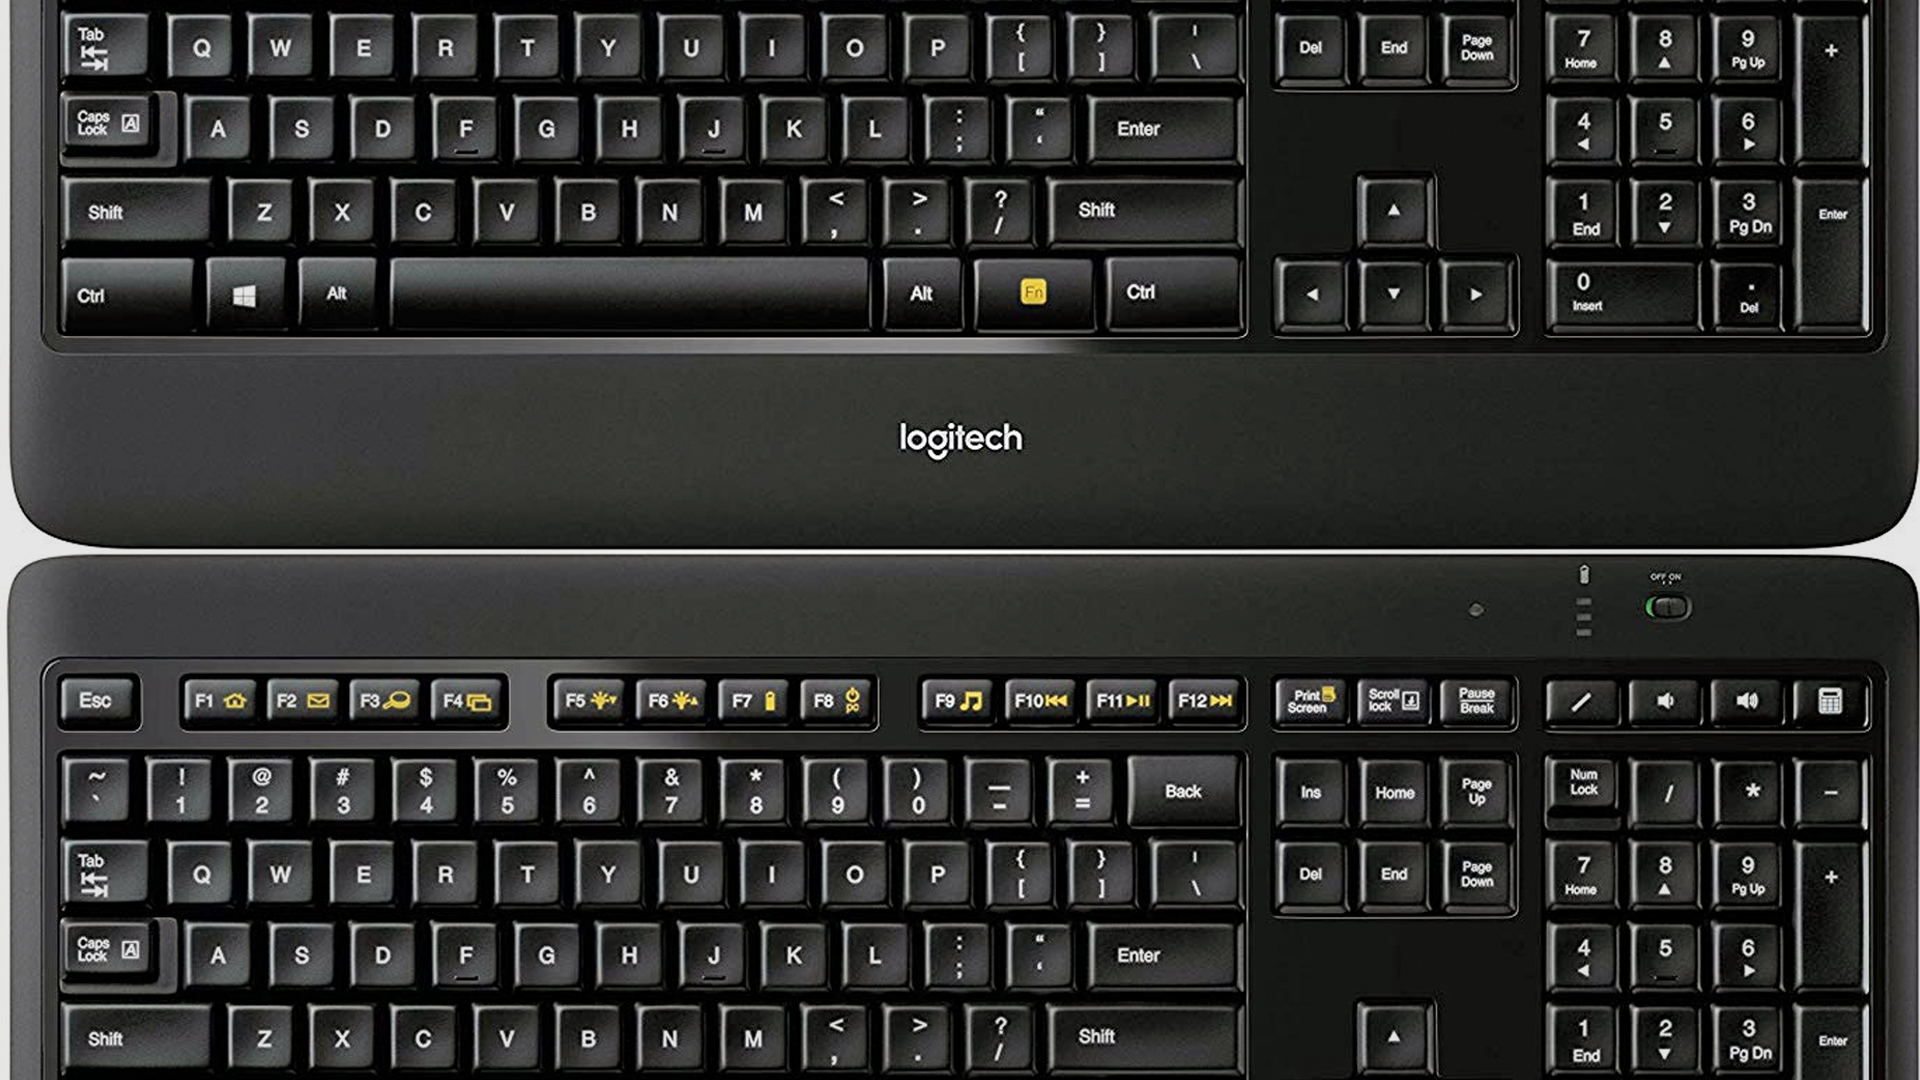 An In-Depth Review of the Logitech Illuminated Keyboard插图1